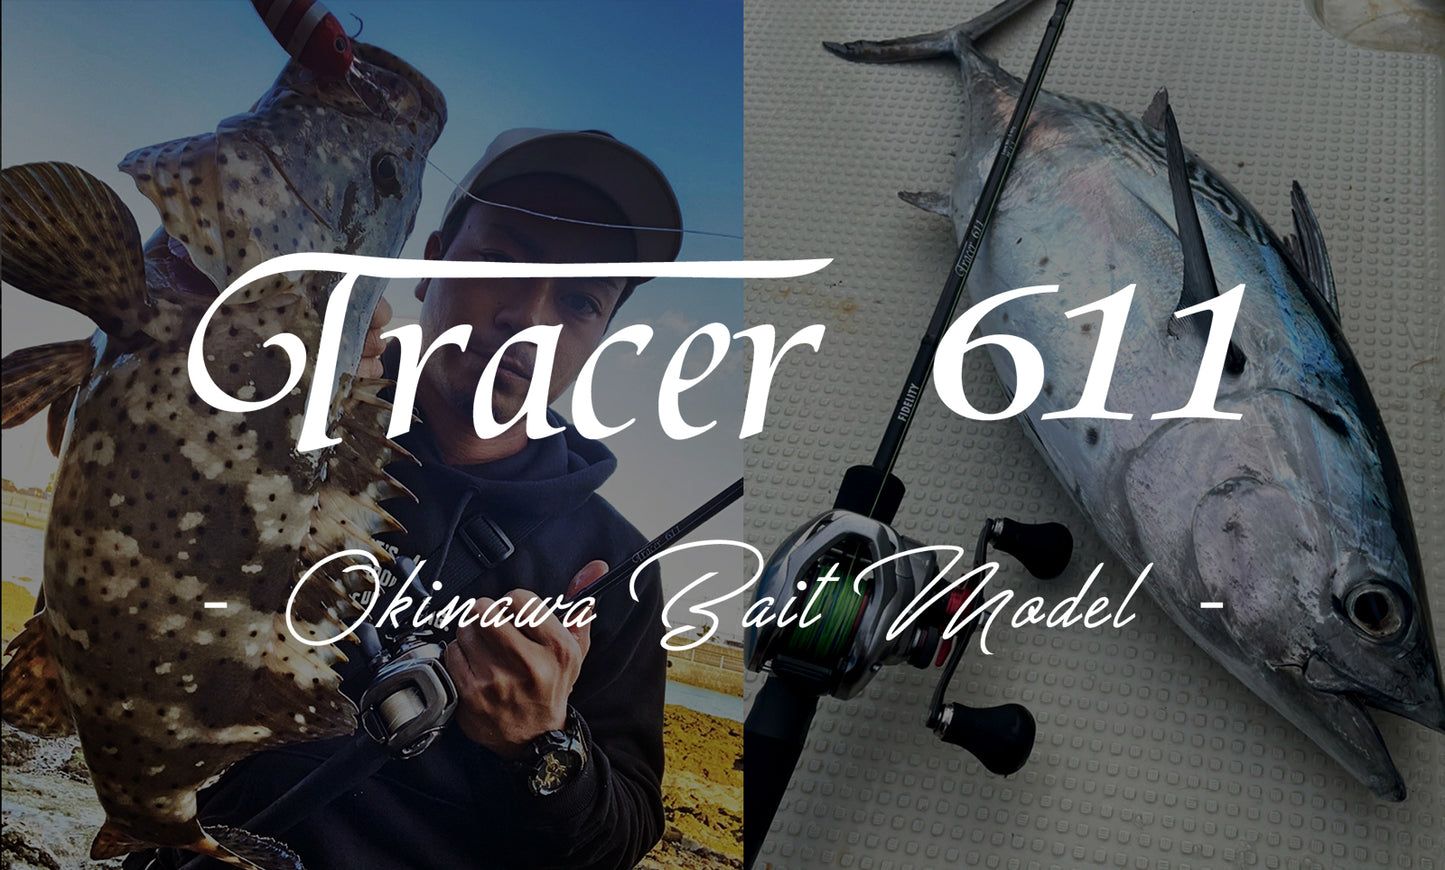 Tracer 611